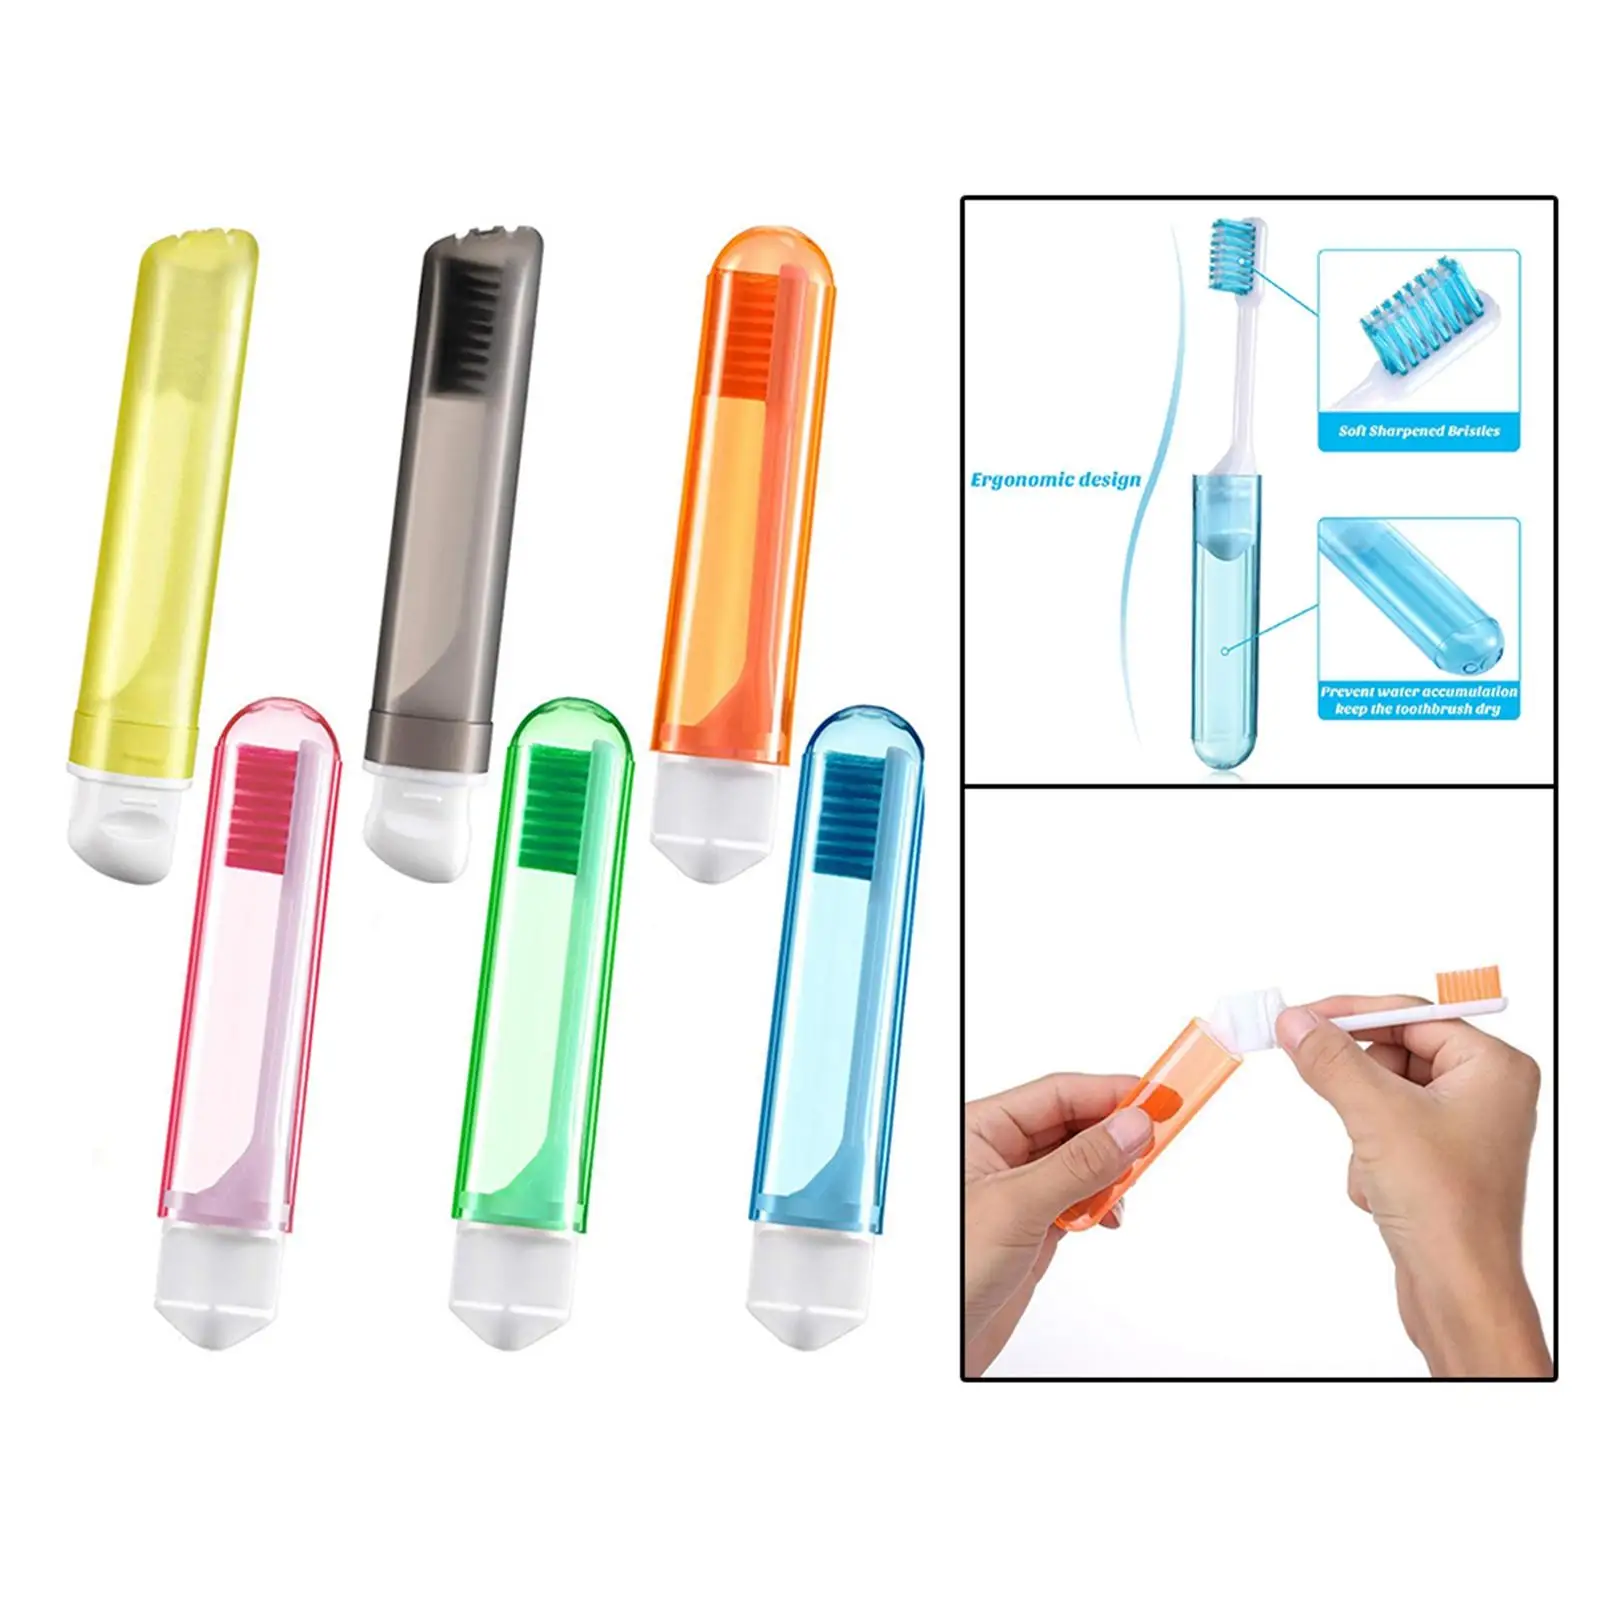 6 Colors Portable Folding Toothbrush Easy to Take Toothbrush Pocket Size with Case Travel Toothbrush for Camping Travel Girl Boy